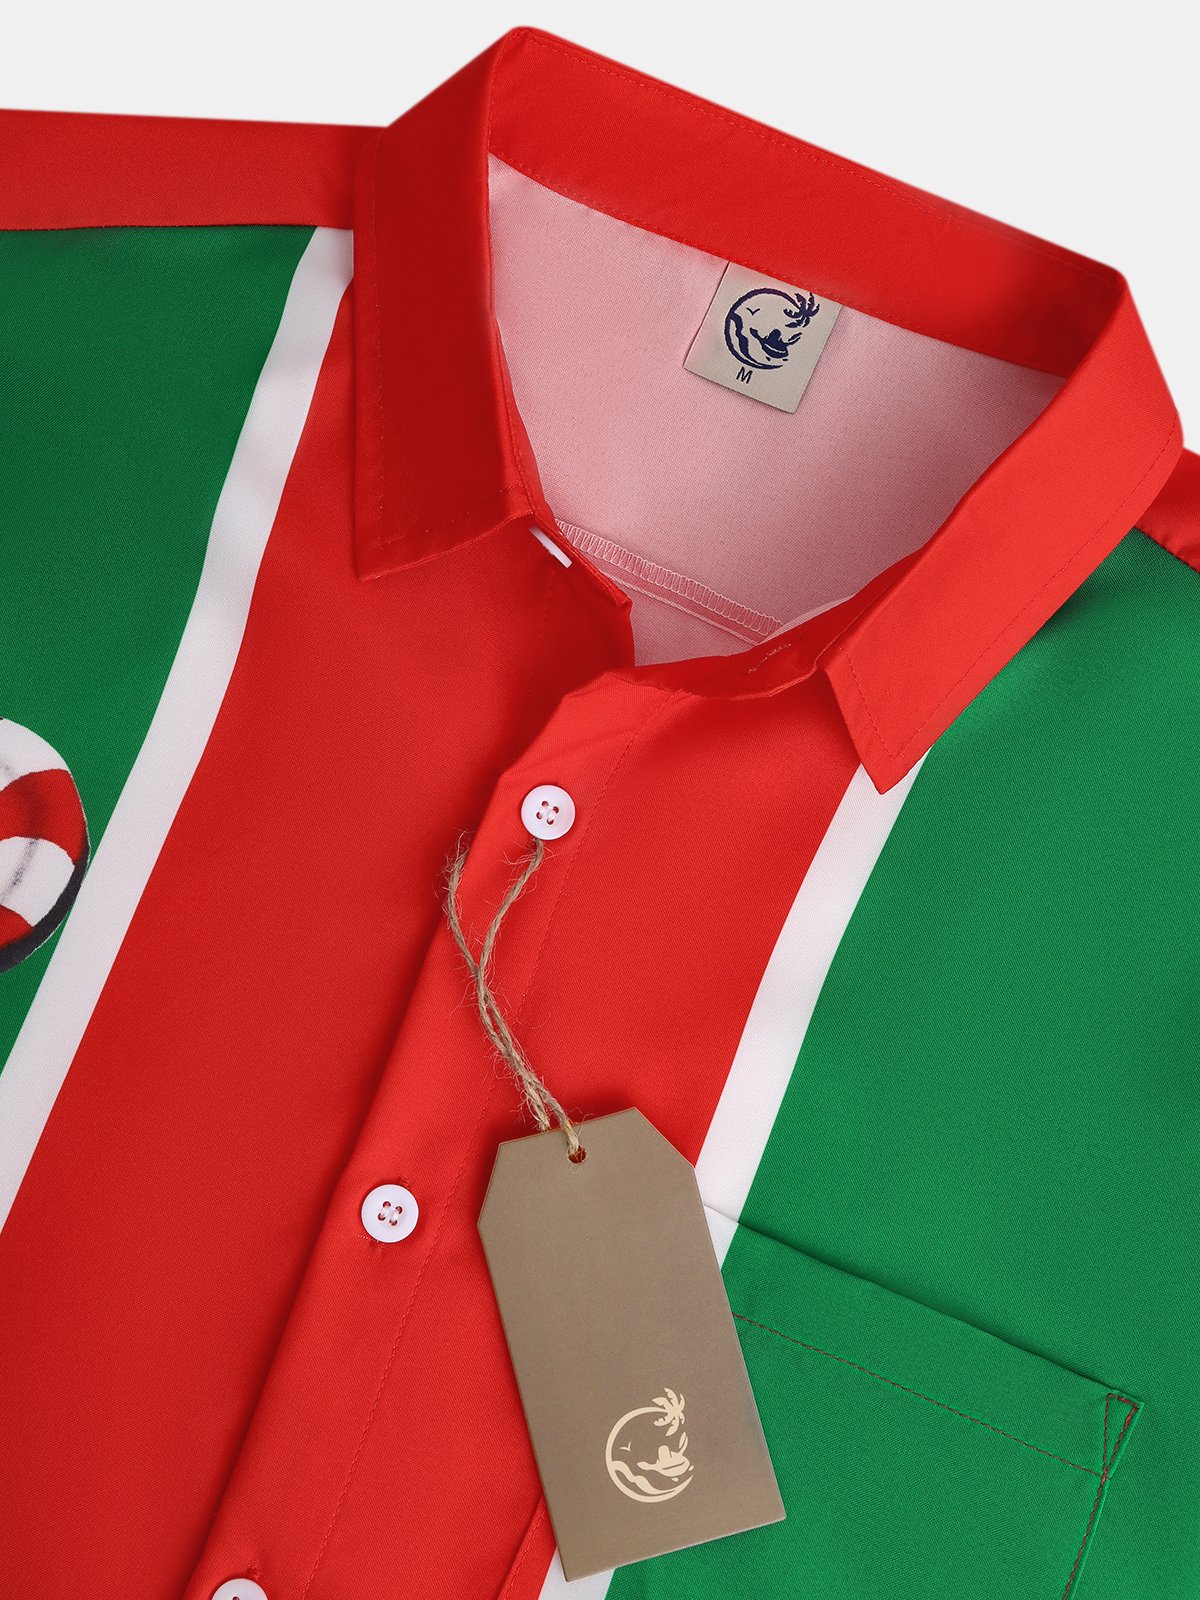 Candy Canes Chest Pocket Short Sleeve Bowling Shirt